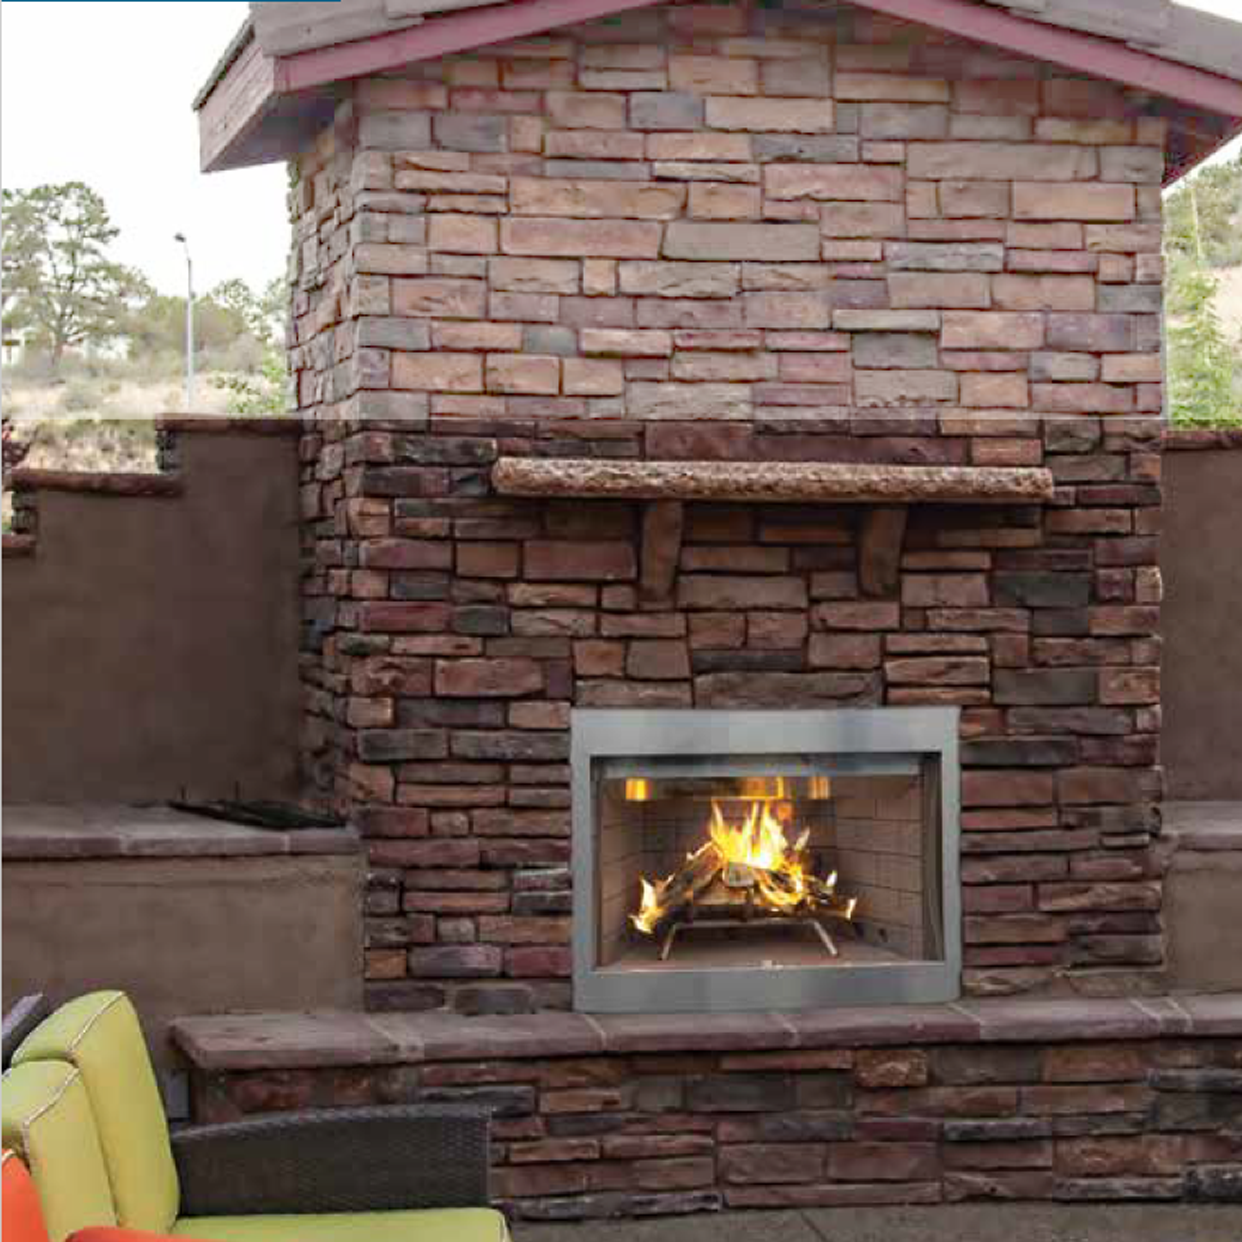 Superior 42 Inch Outdoor Wood Fireplace | WRE3042